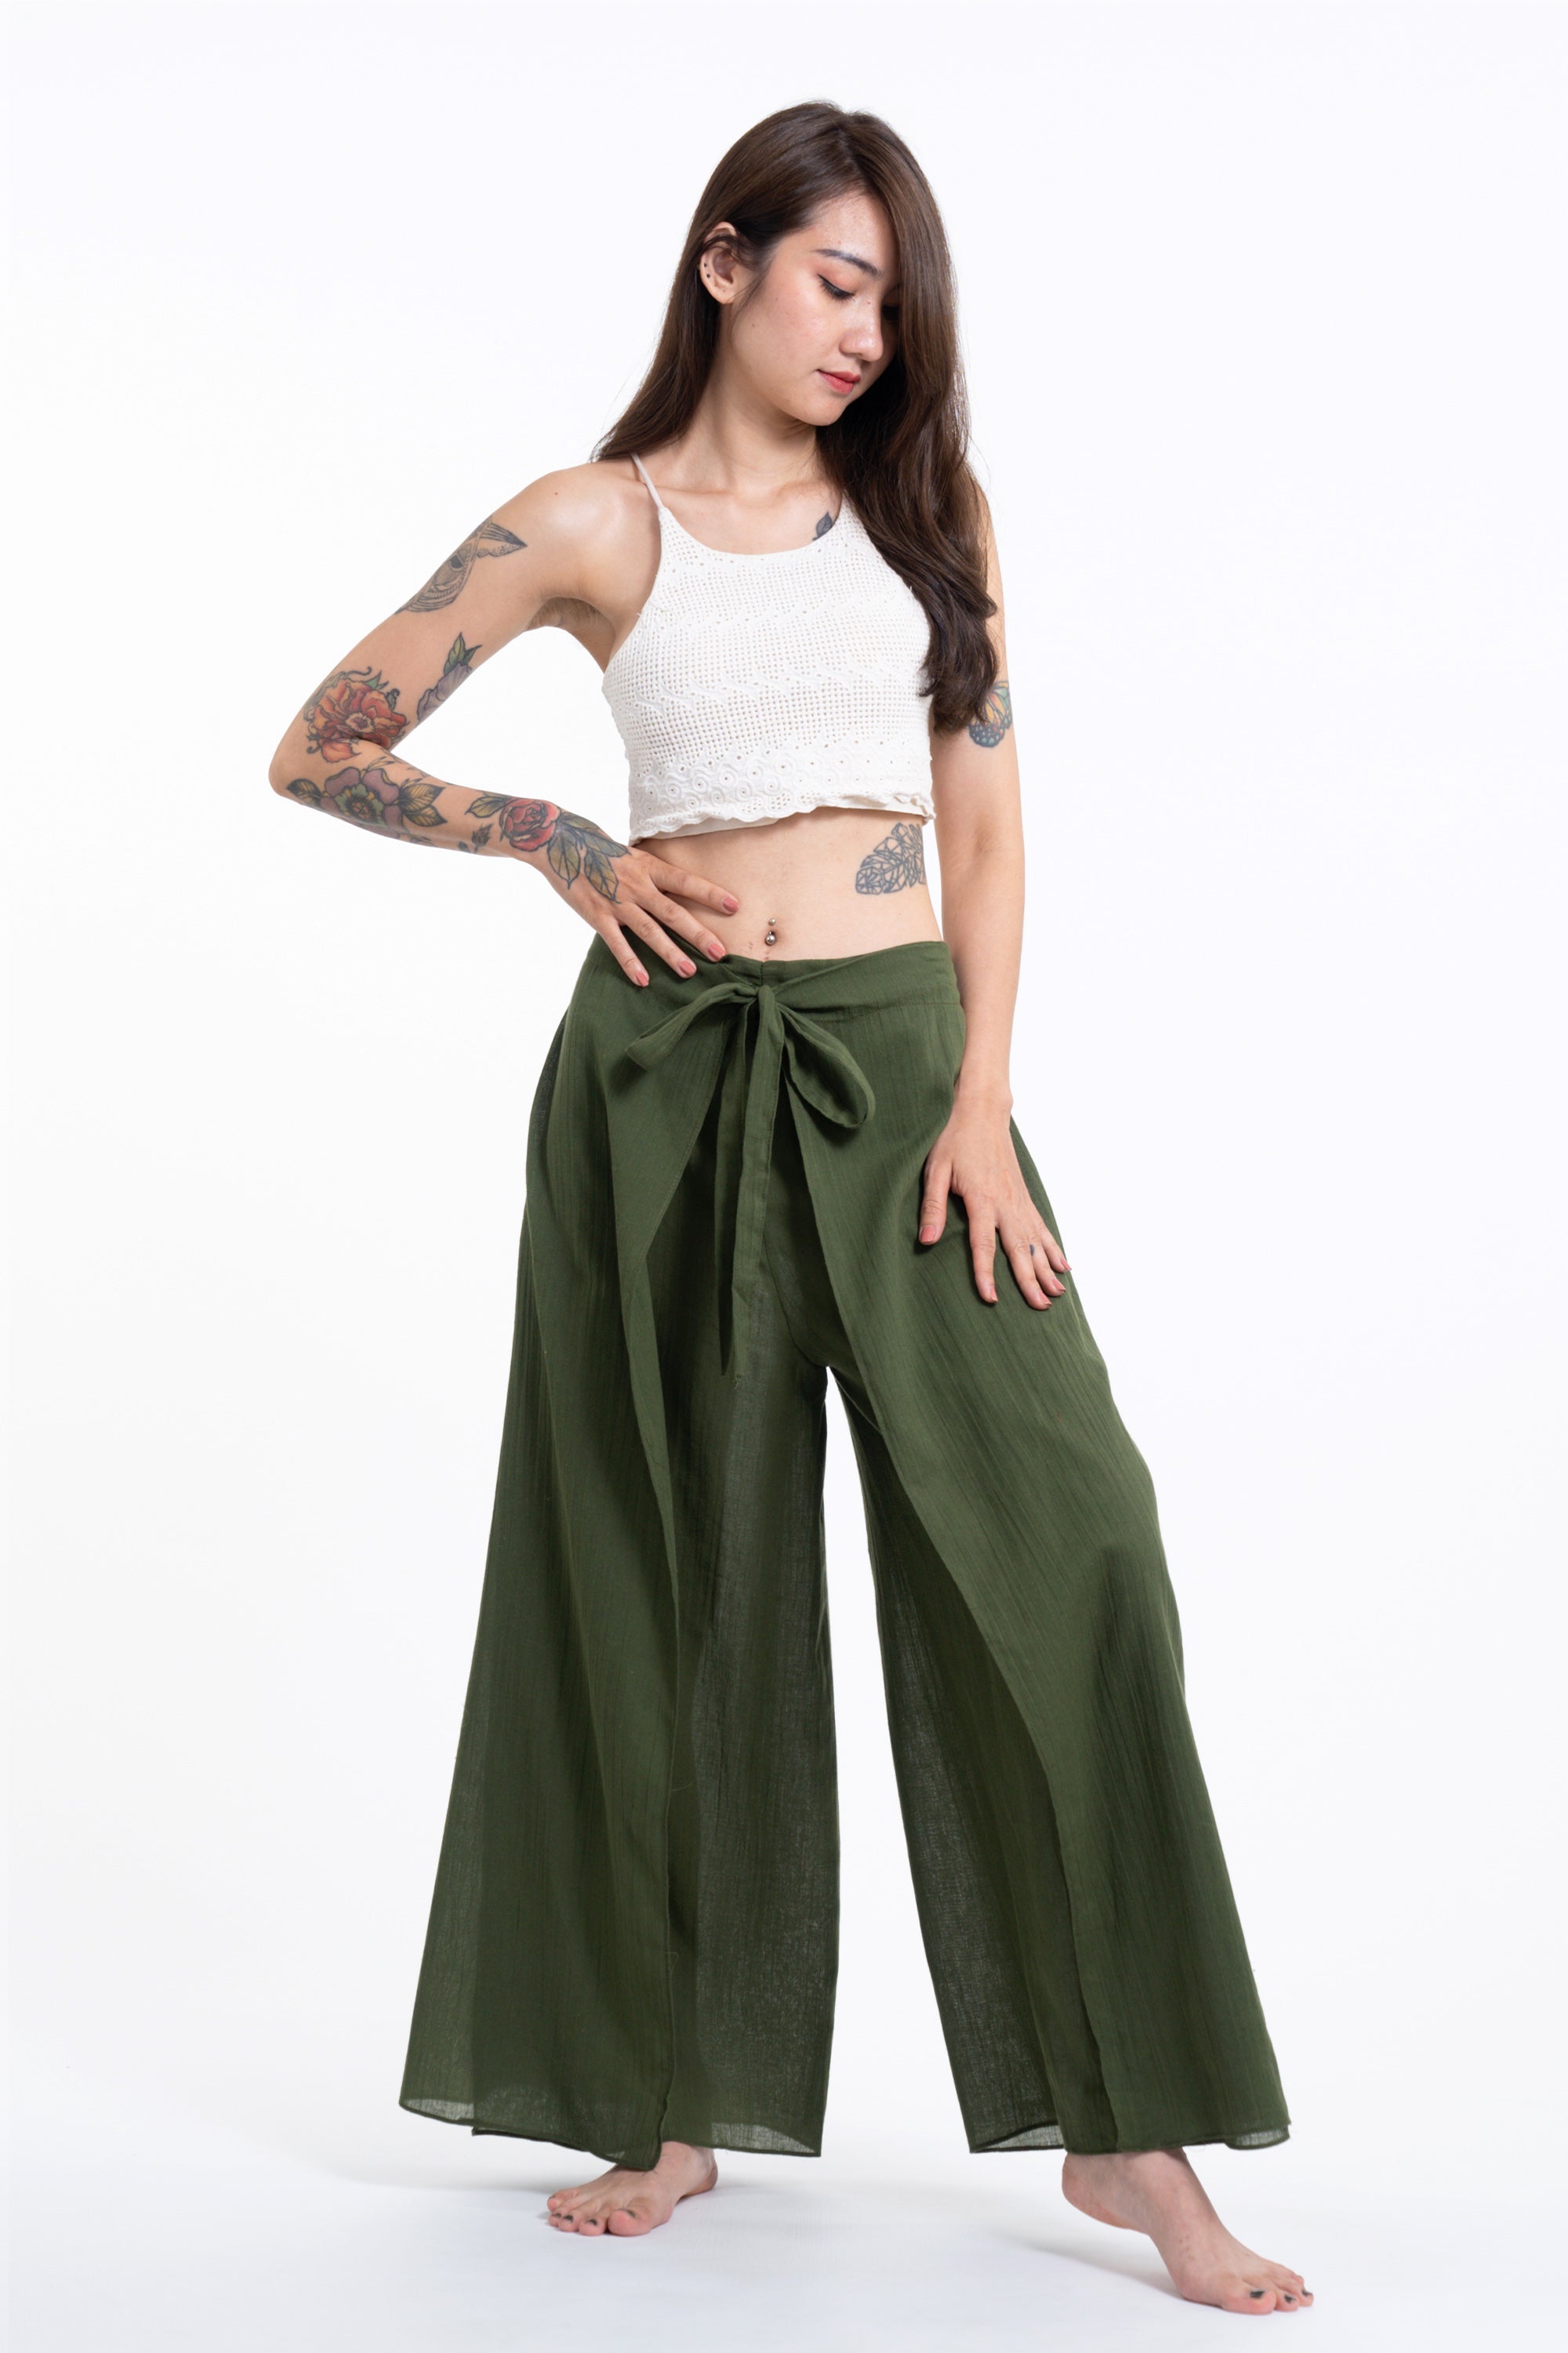 Women's Cotton Wrap Palazzo Pants in Solid Green – Harem Pants